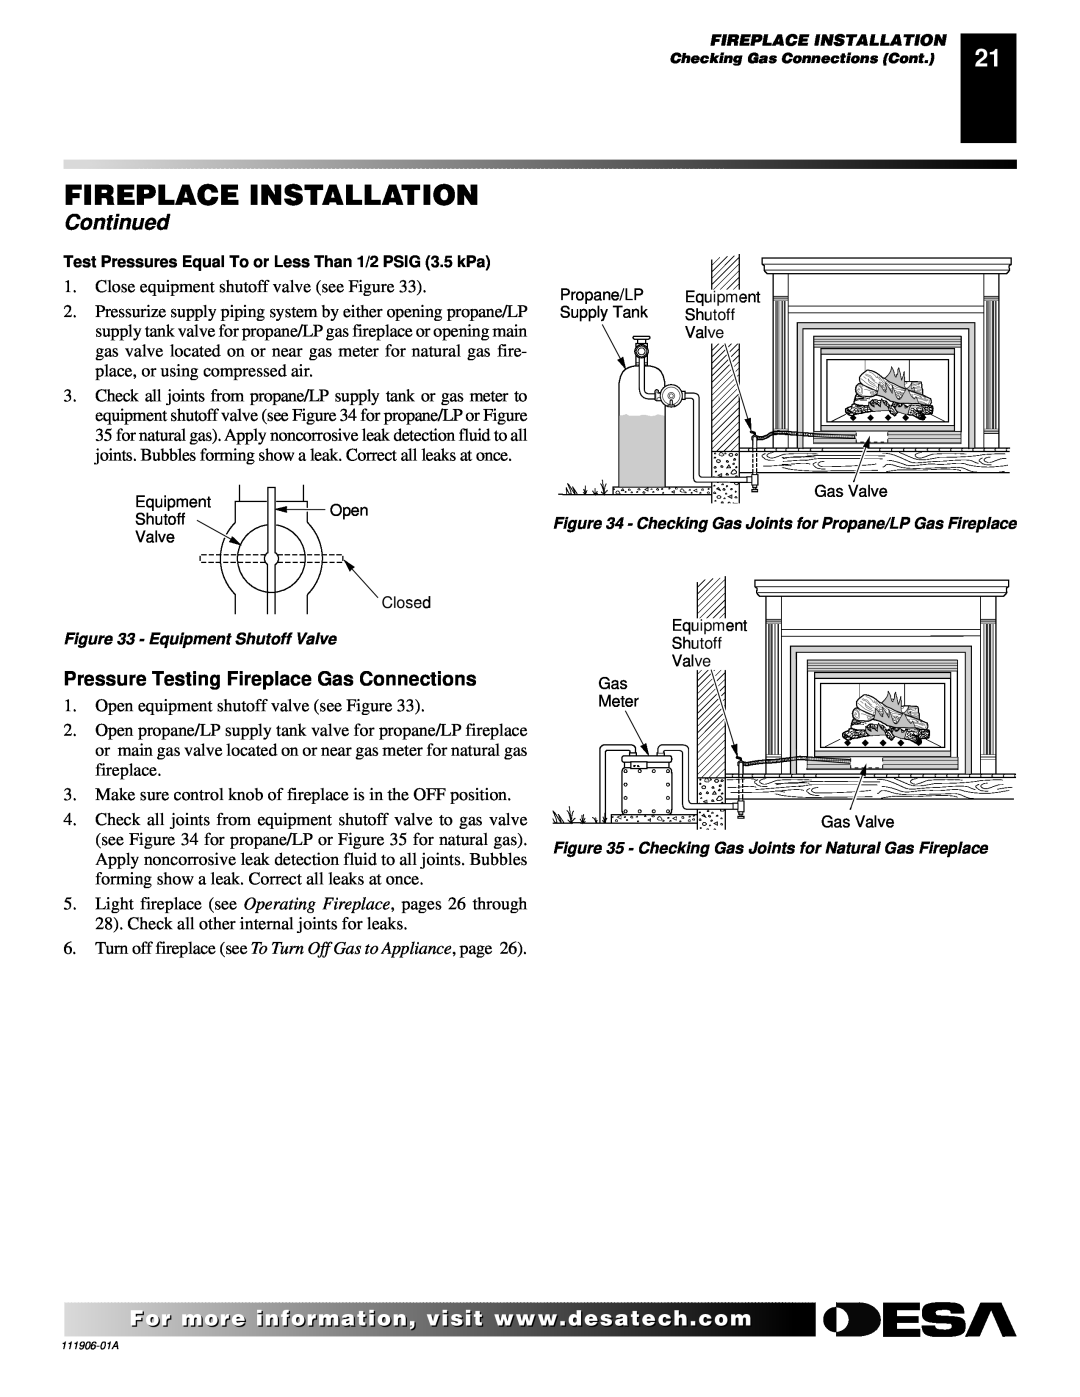 Desa (V)V42NA(1) installation manual Fireplace Installation, Continued, Pressure Testing Fireplace Gas Connections 